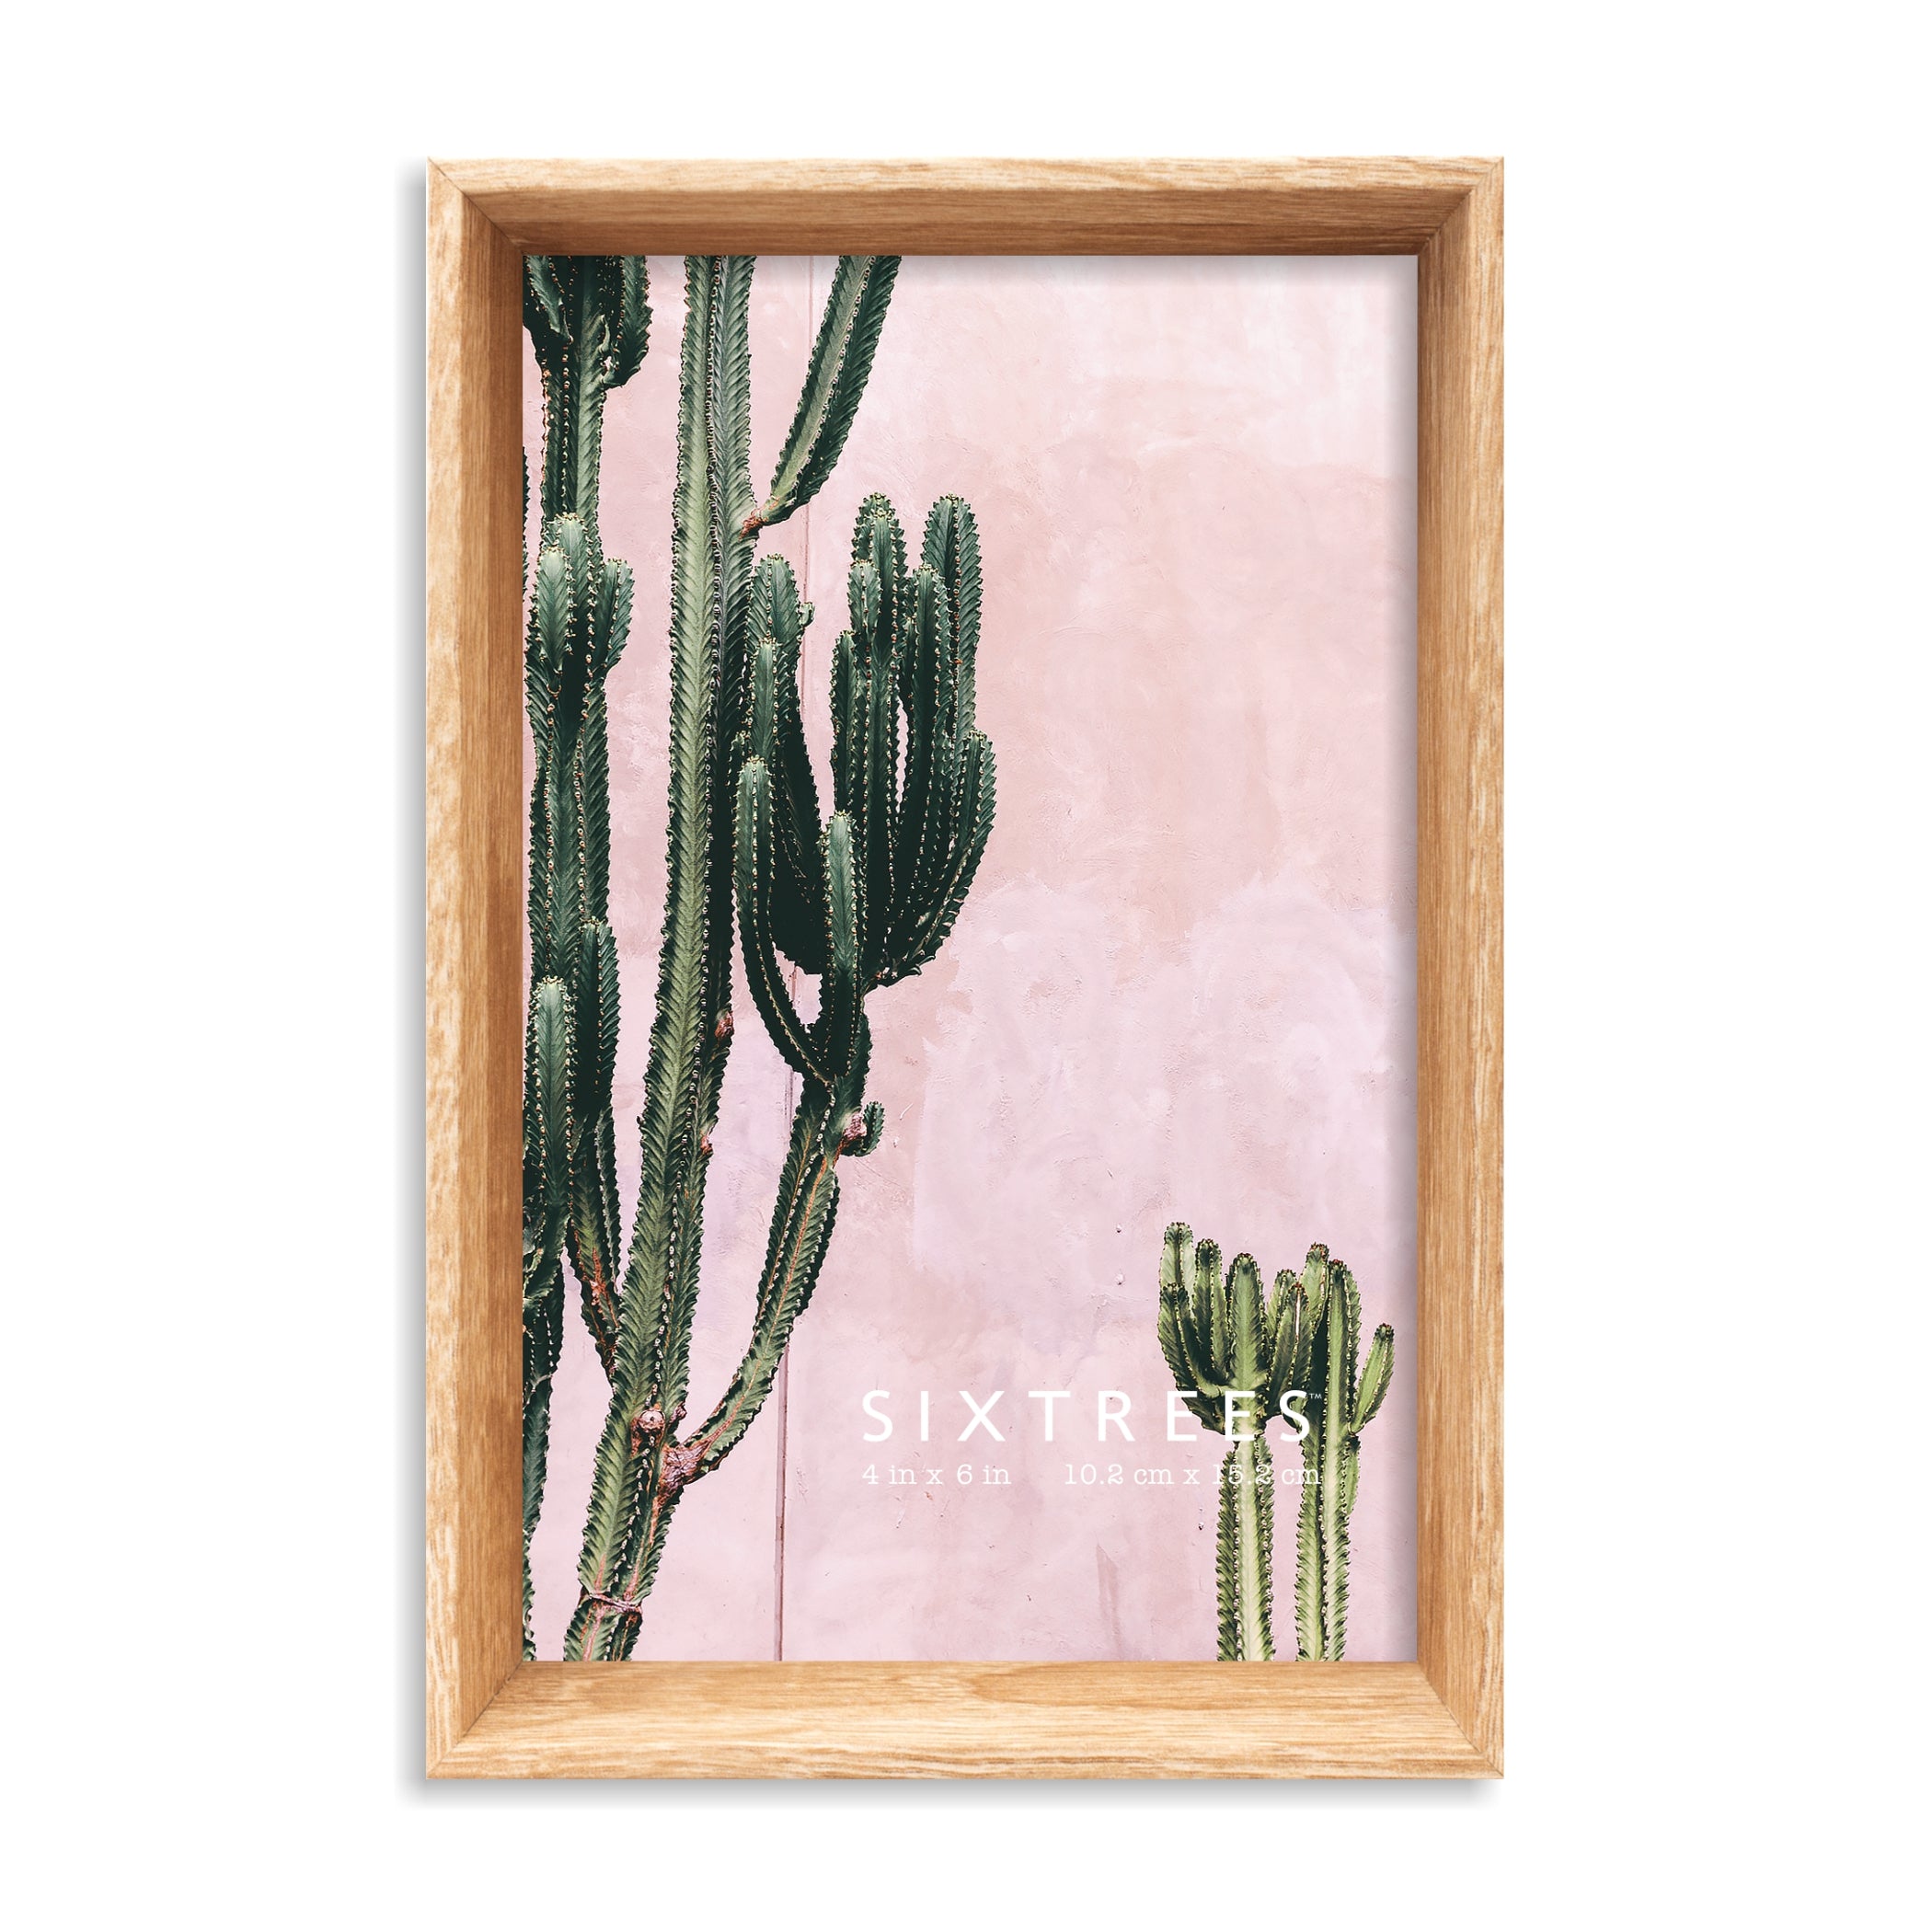 Provo Rustic Frame - 4X6, 5X7, 8X10 Picture Frame – Sixtrees